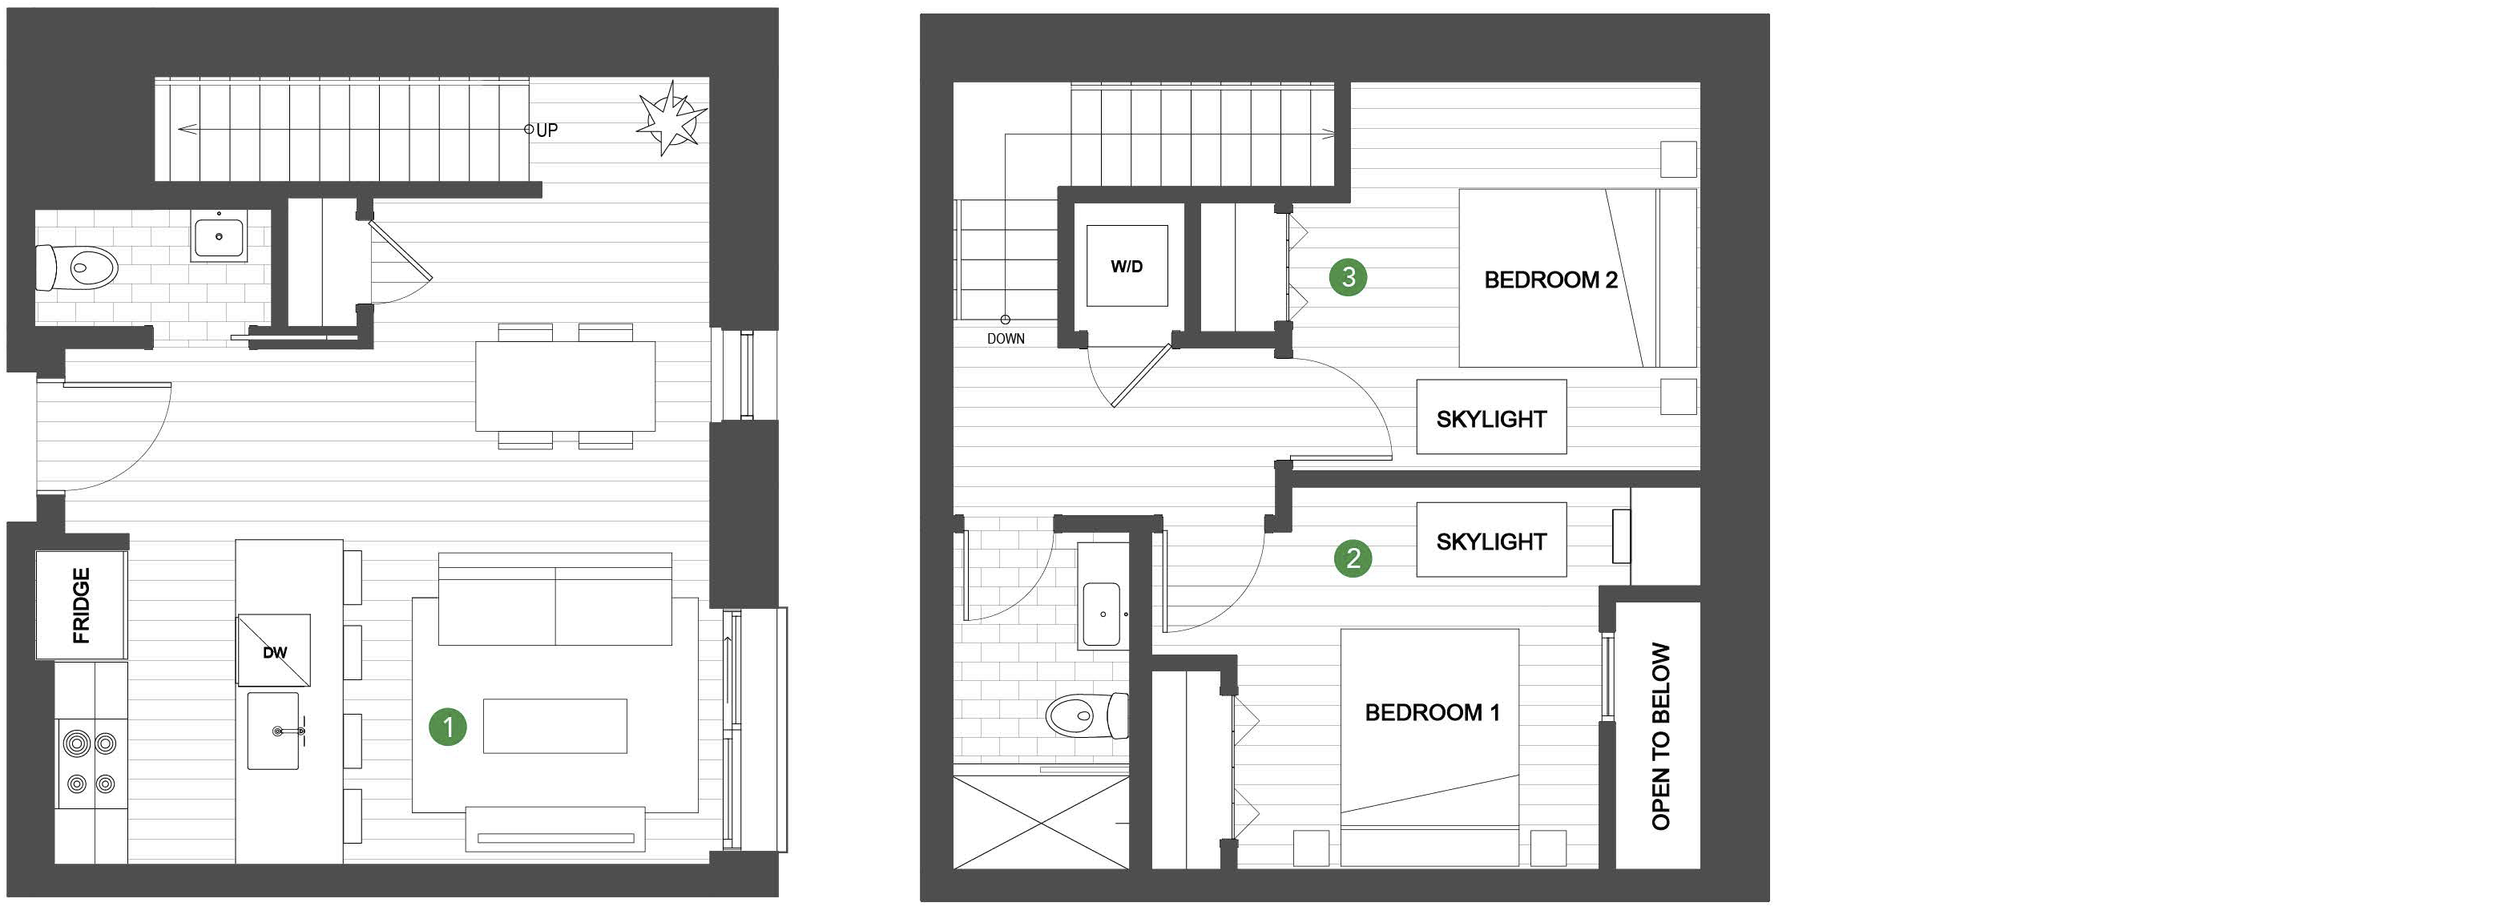   UNIT 01  2 BEDROOM / 1.5 BATH DUPLEX +OFFICE NICHE 1042 SQUARE FEET   REQUEST INFORMATION / APPLY FOR THIS UNIT   